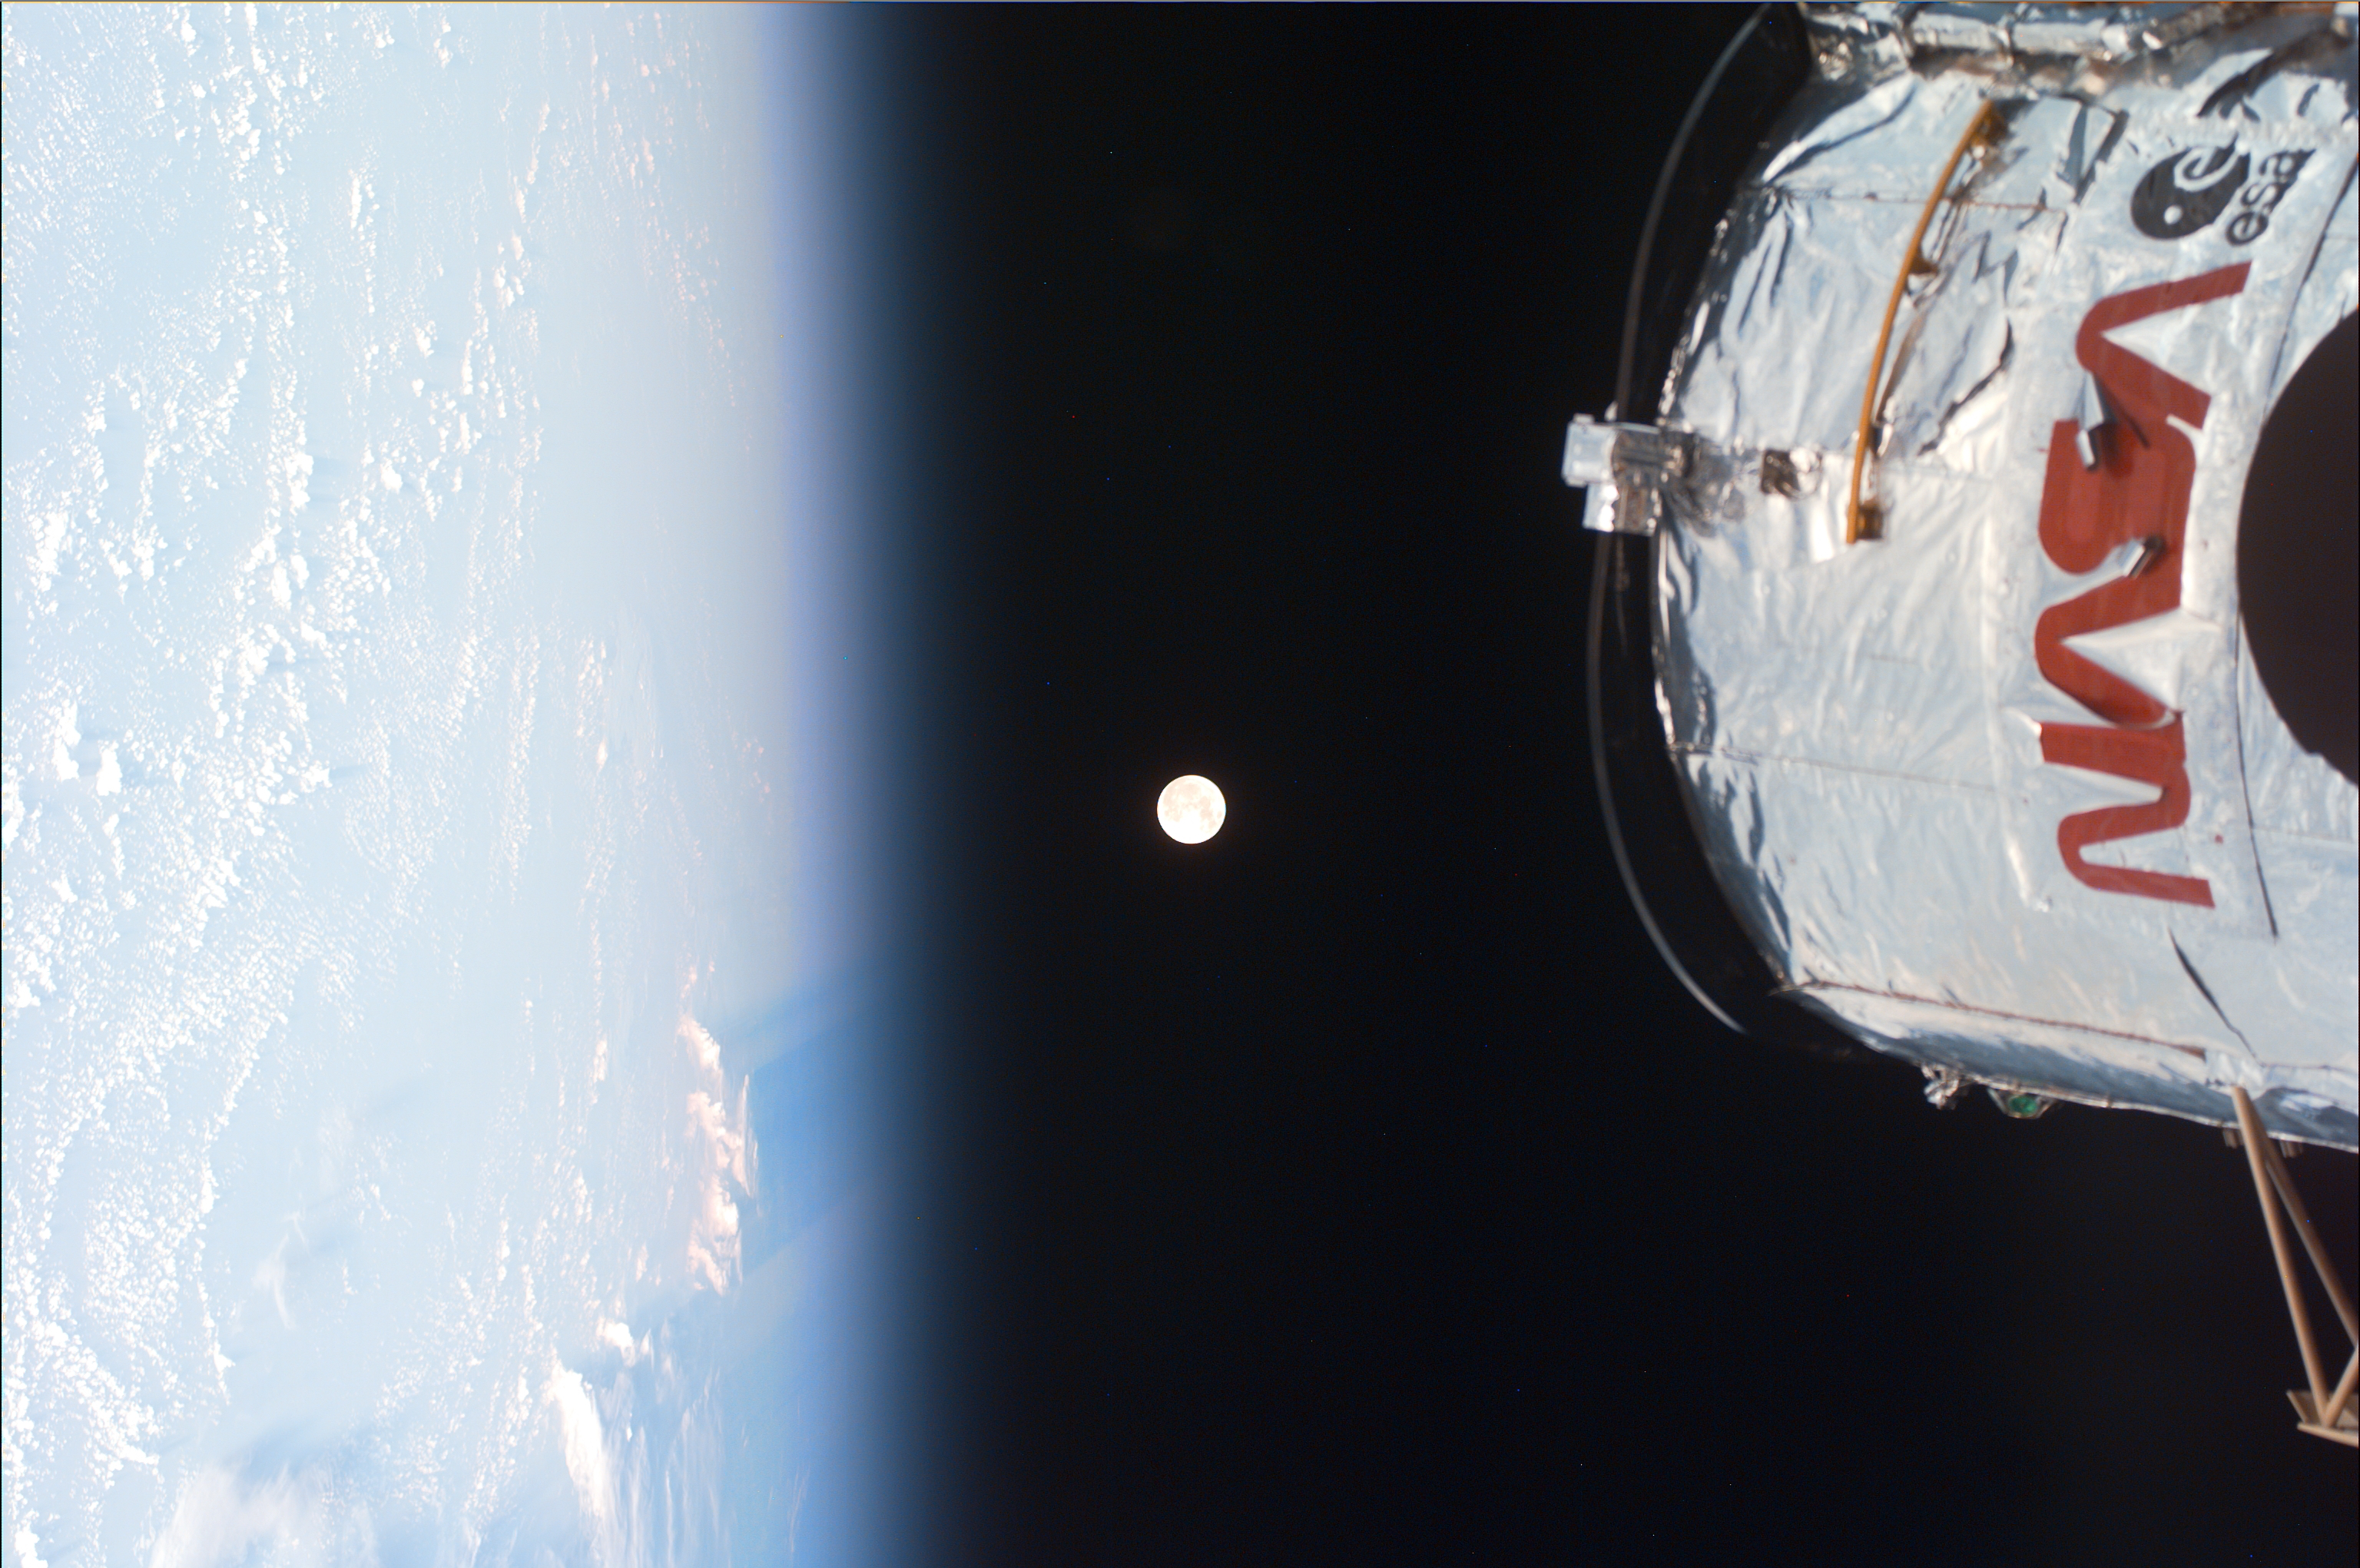 The earth on the left, the moon in the middle, and the top of Hubble on the right.